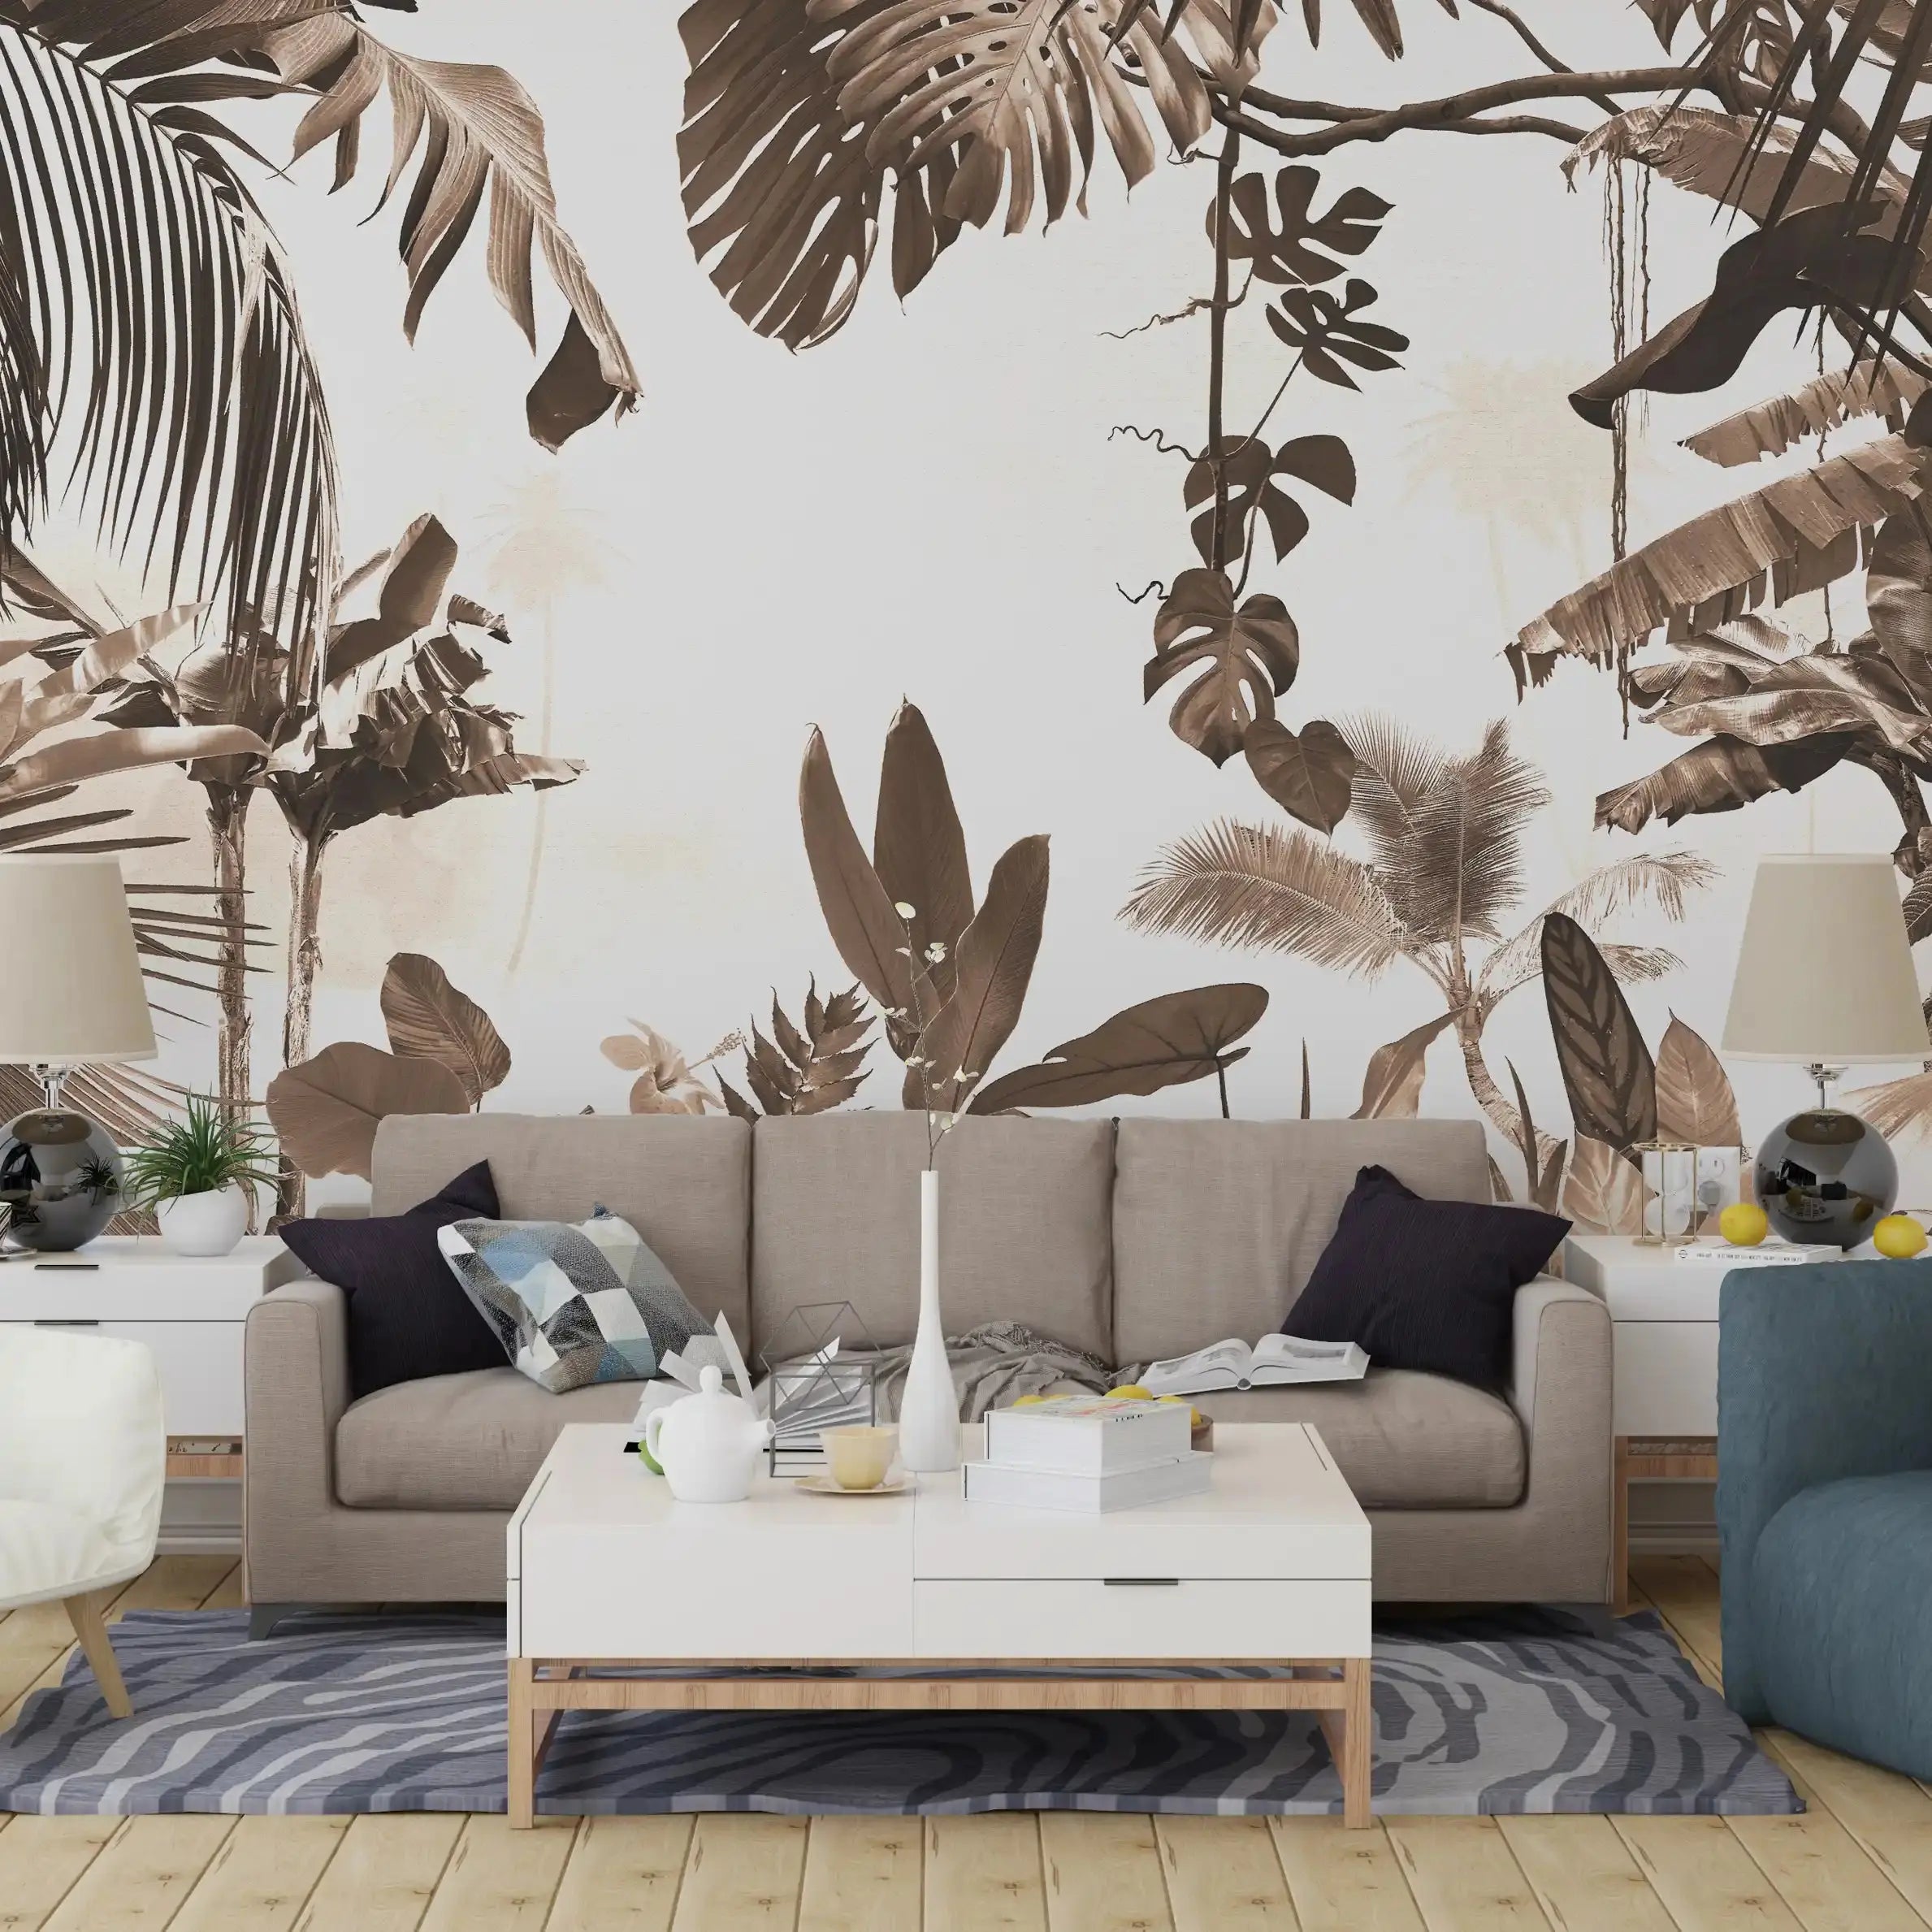 3014-F / Removable Wallpaper Peel and Stick - Abstract Colorful Tropical Plants Design for Modern Home Decor - Artevella